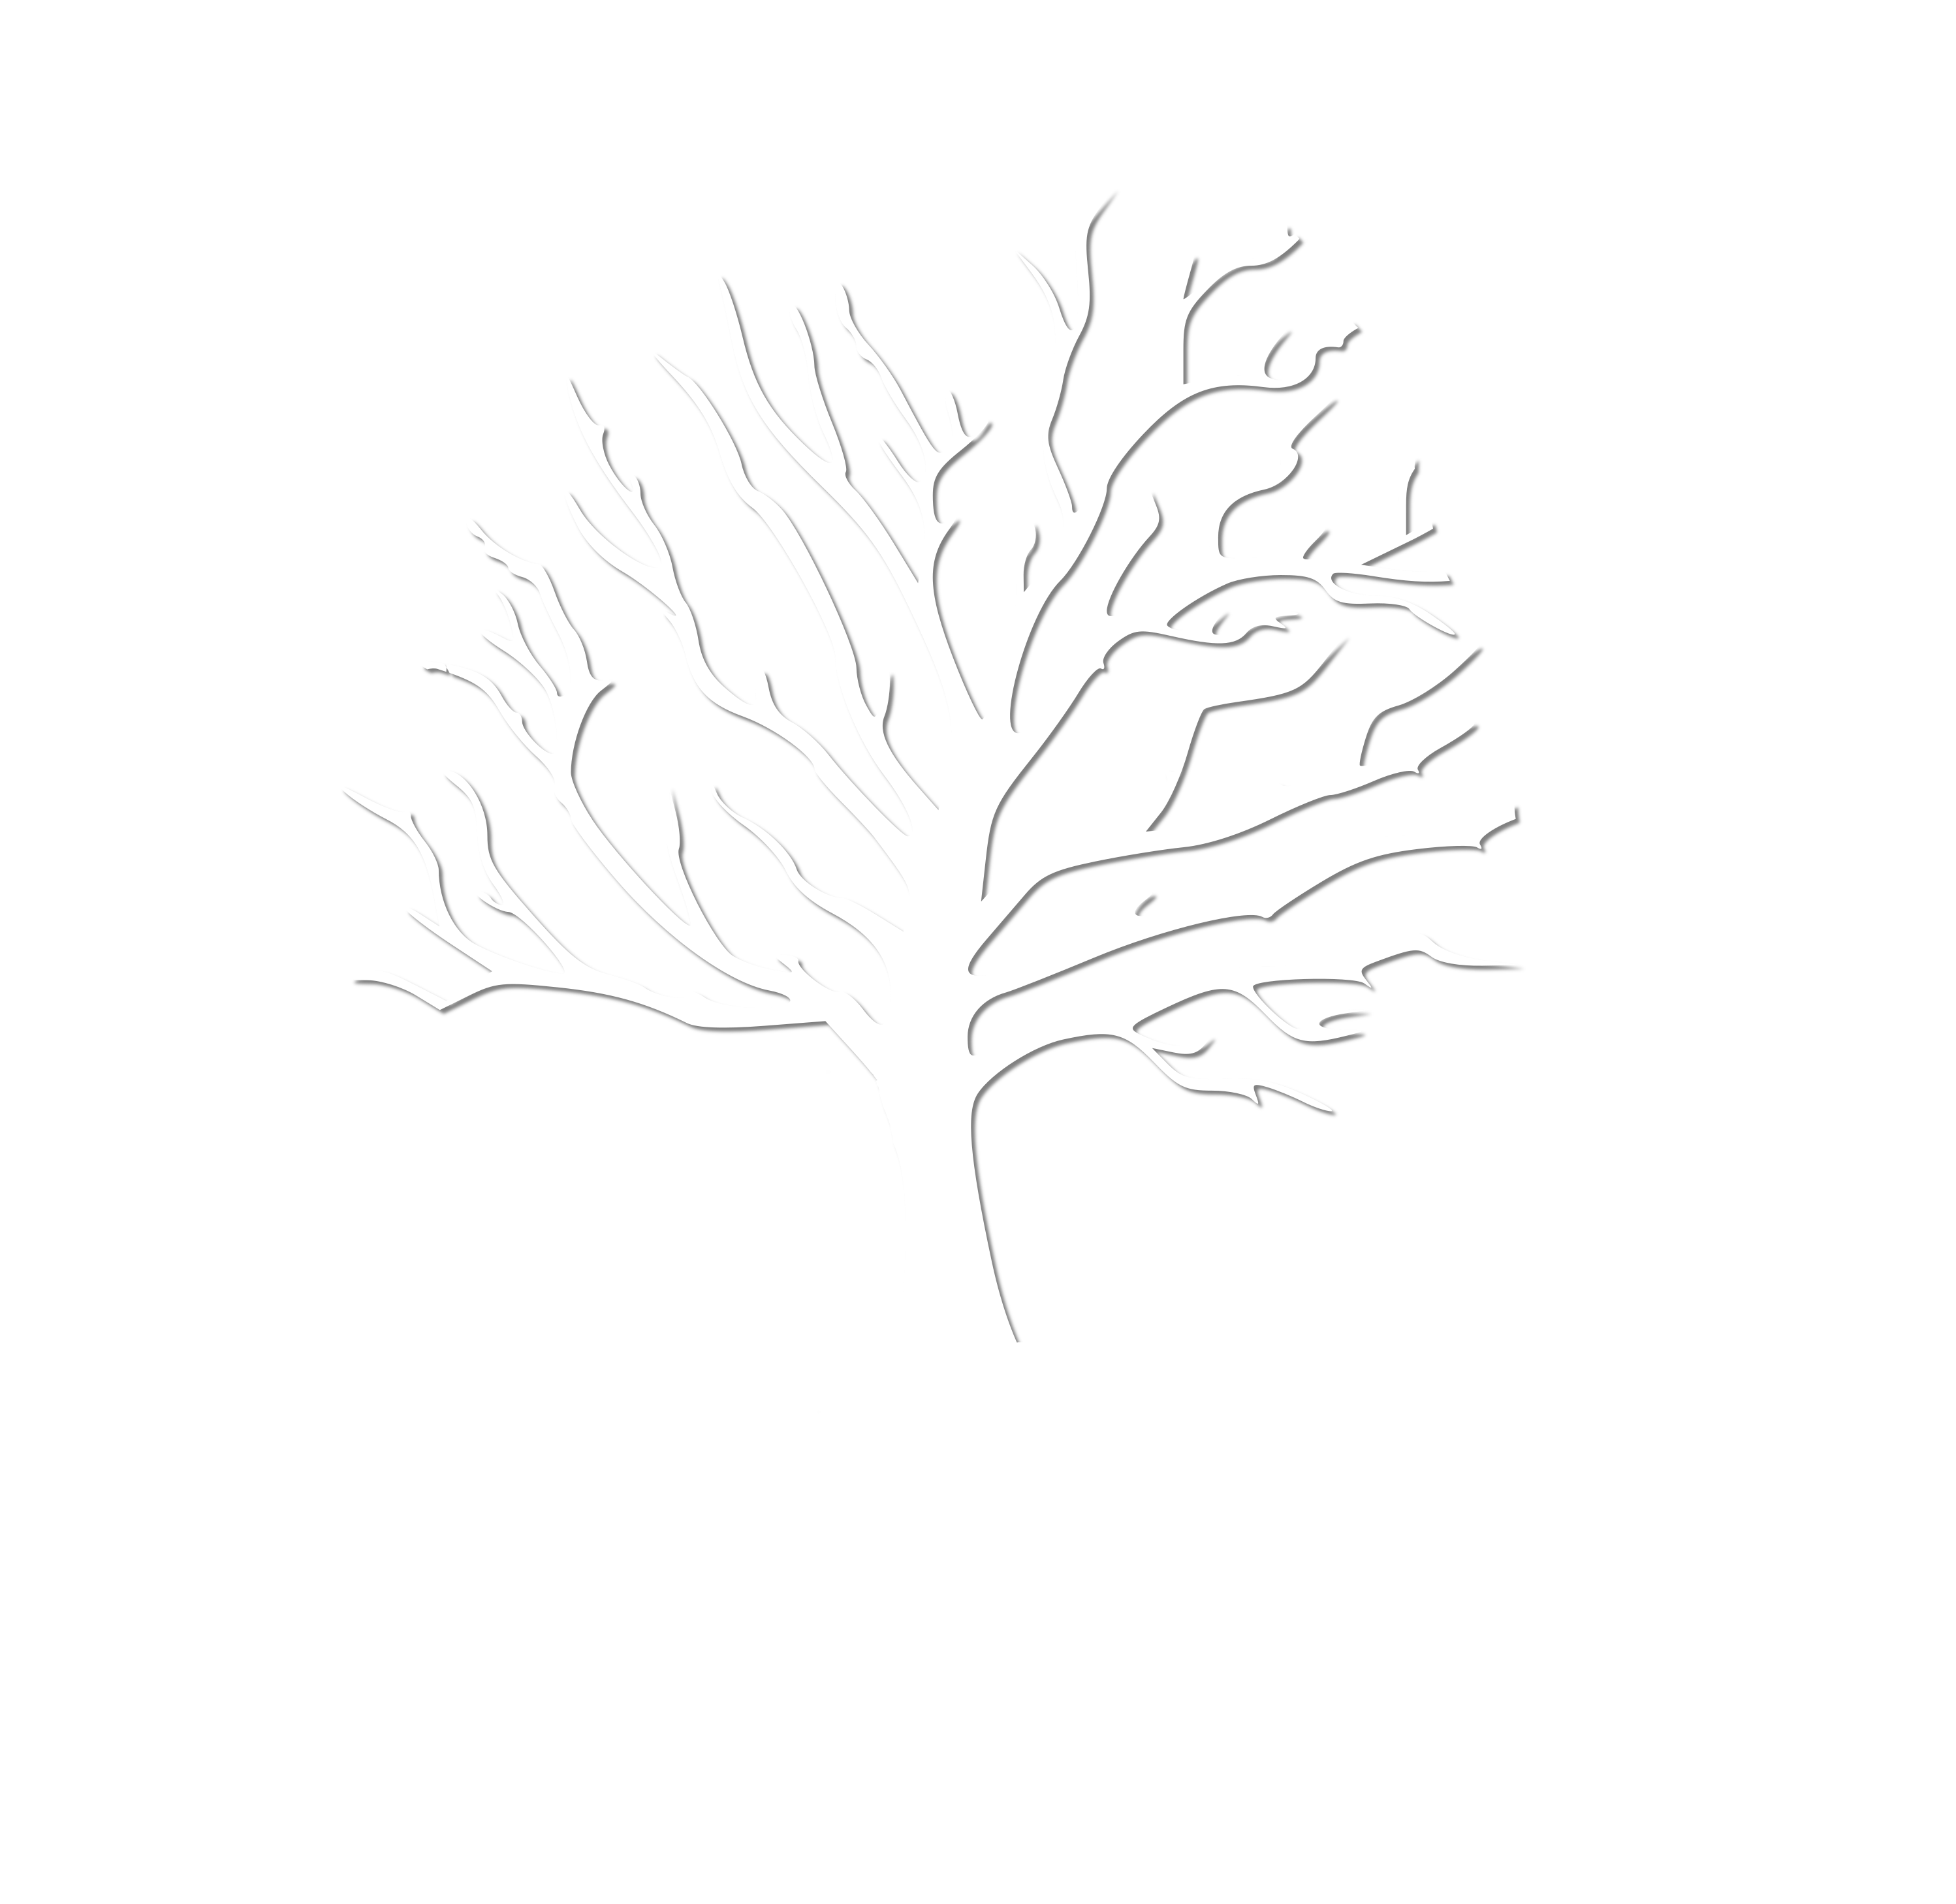 theironwoodproject